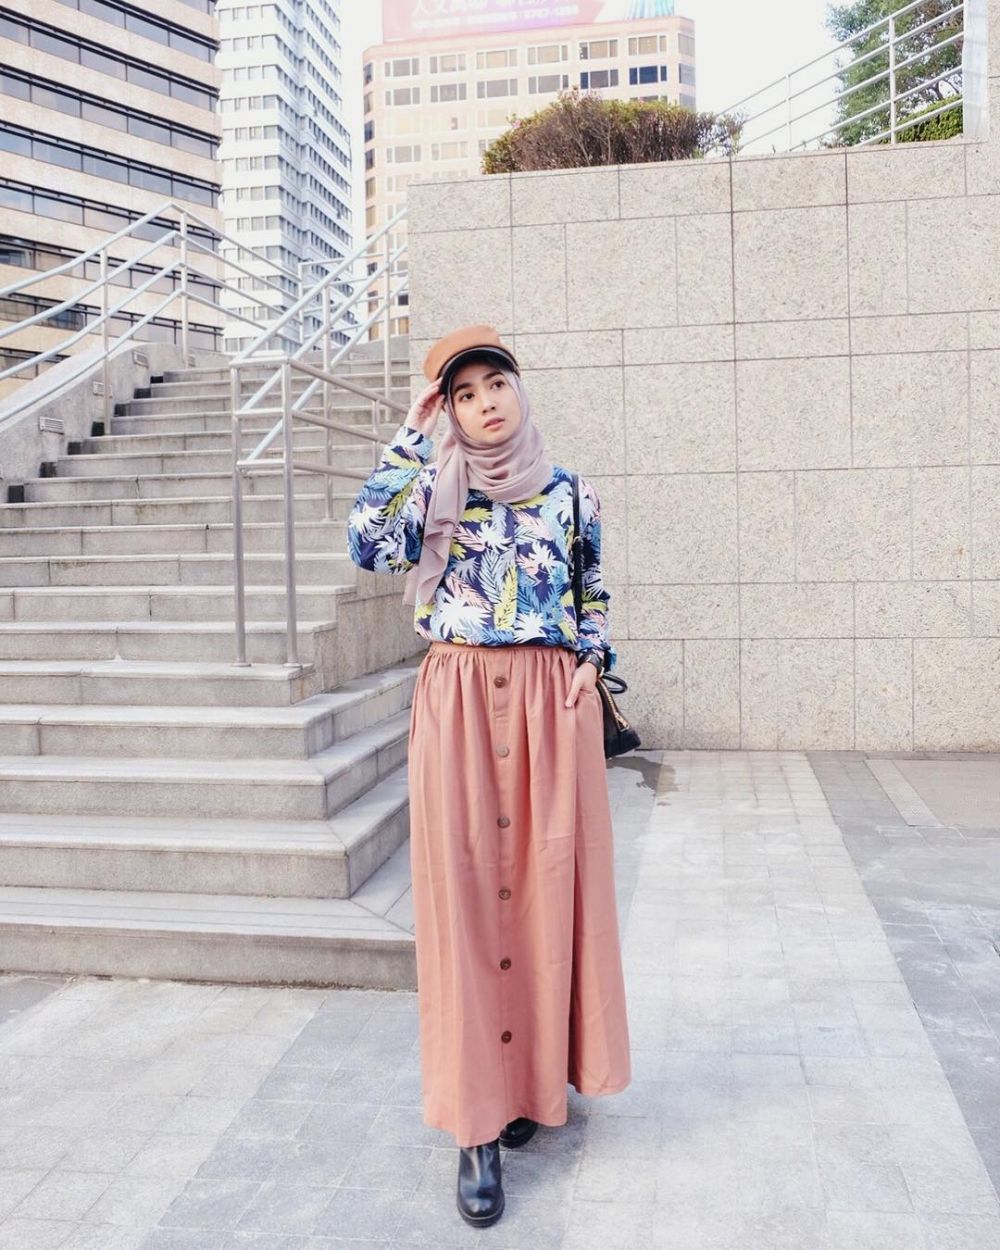 12 Mix and Match Outfit Front Button Skirt ala Richa Etika, Kece Abis!